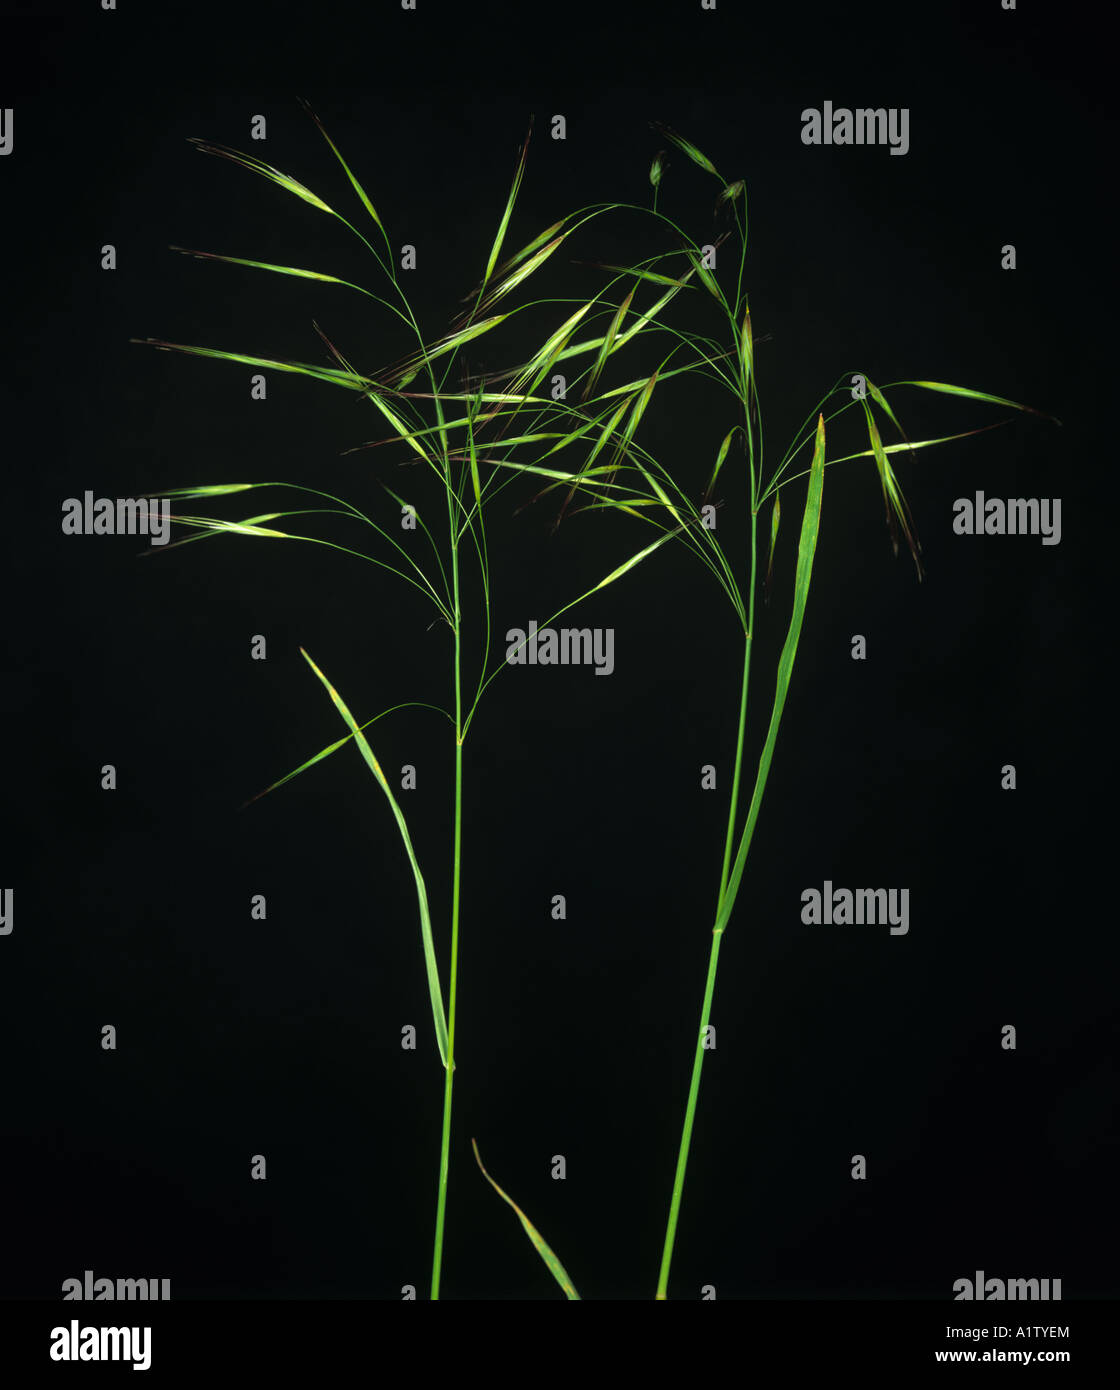 Upright brome Bromus erectus flower spikes against a black background Stock Photo